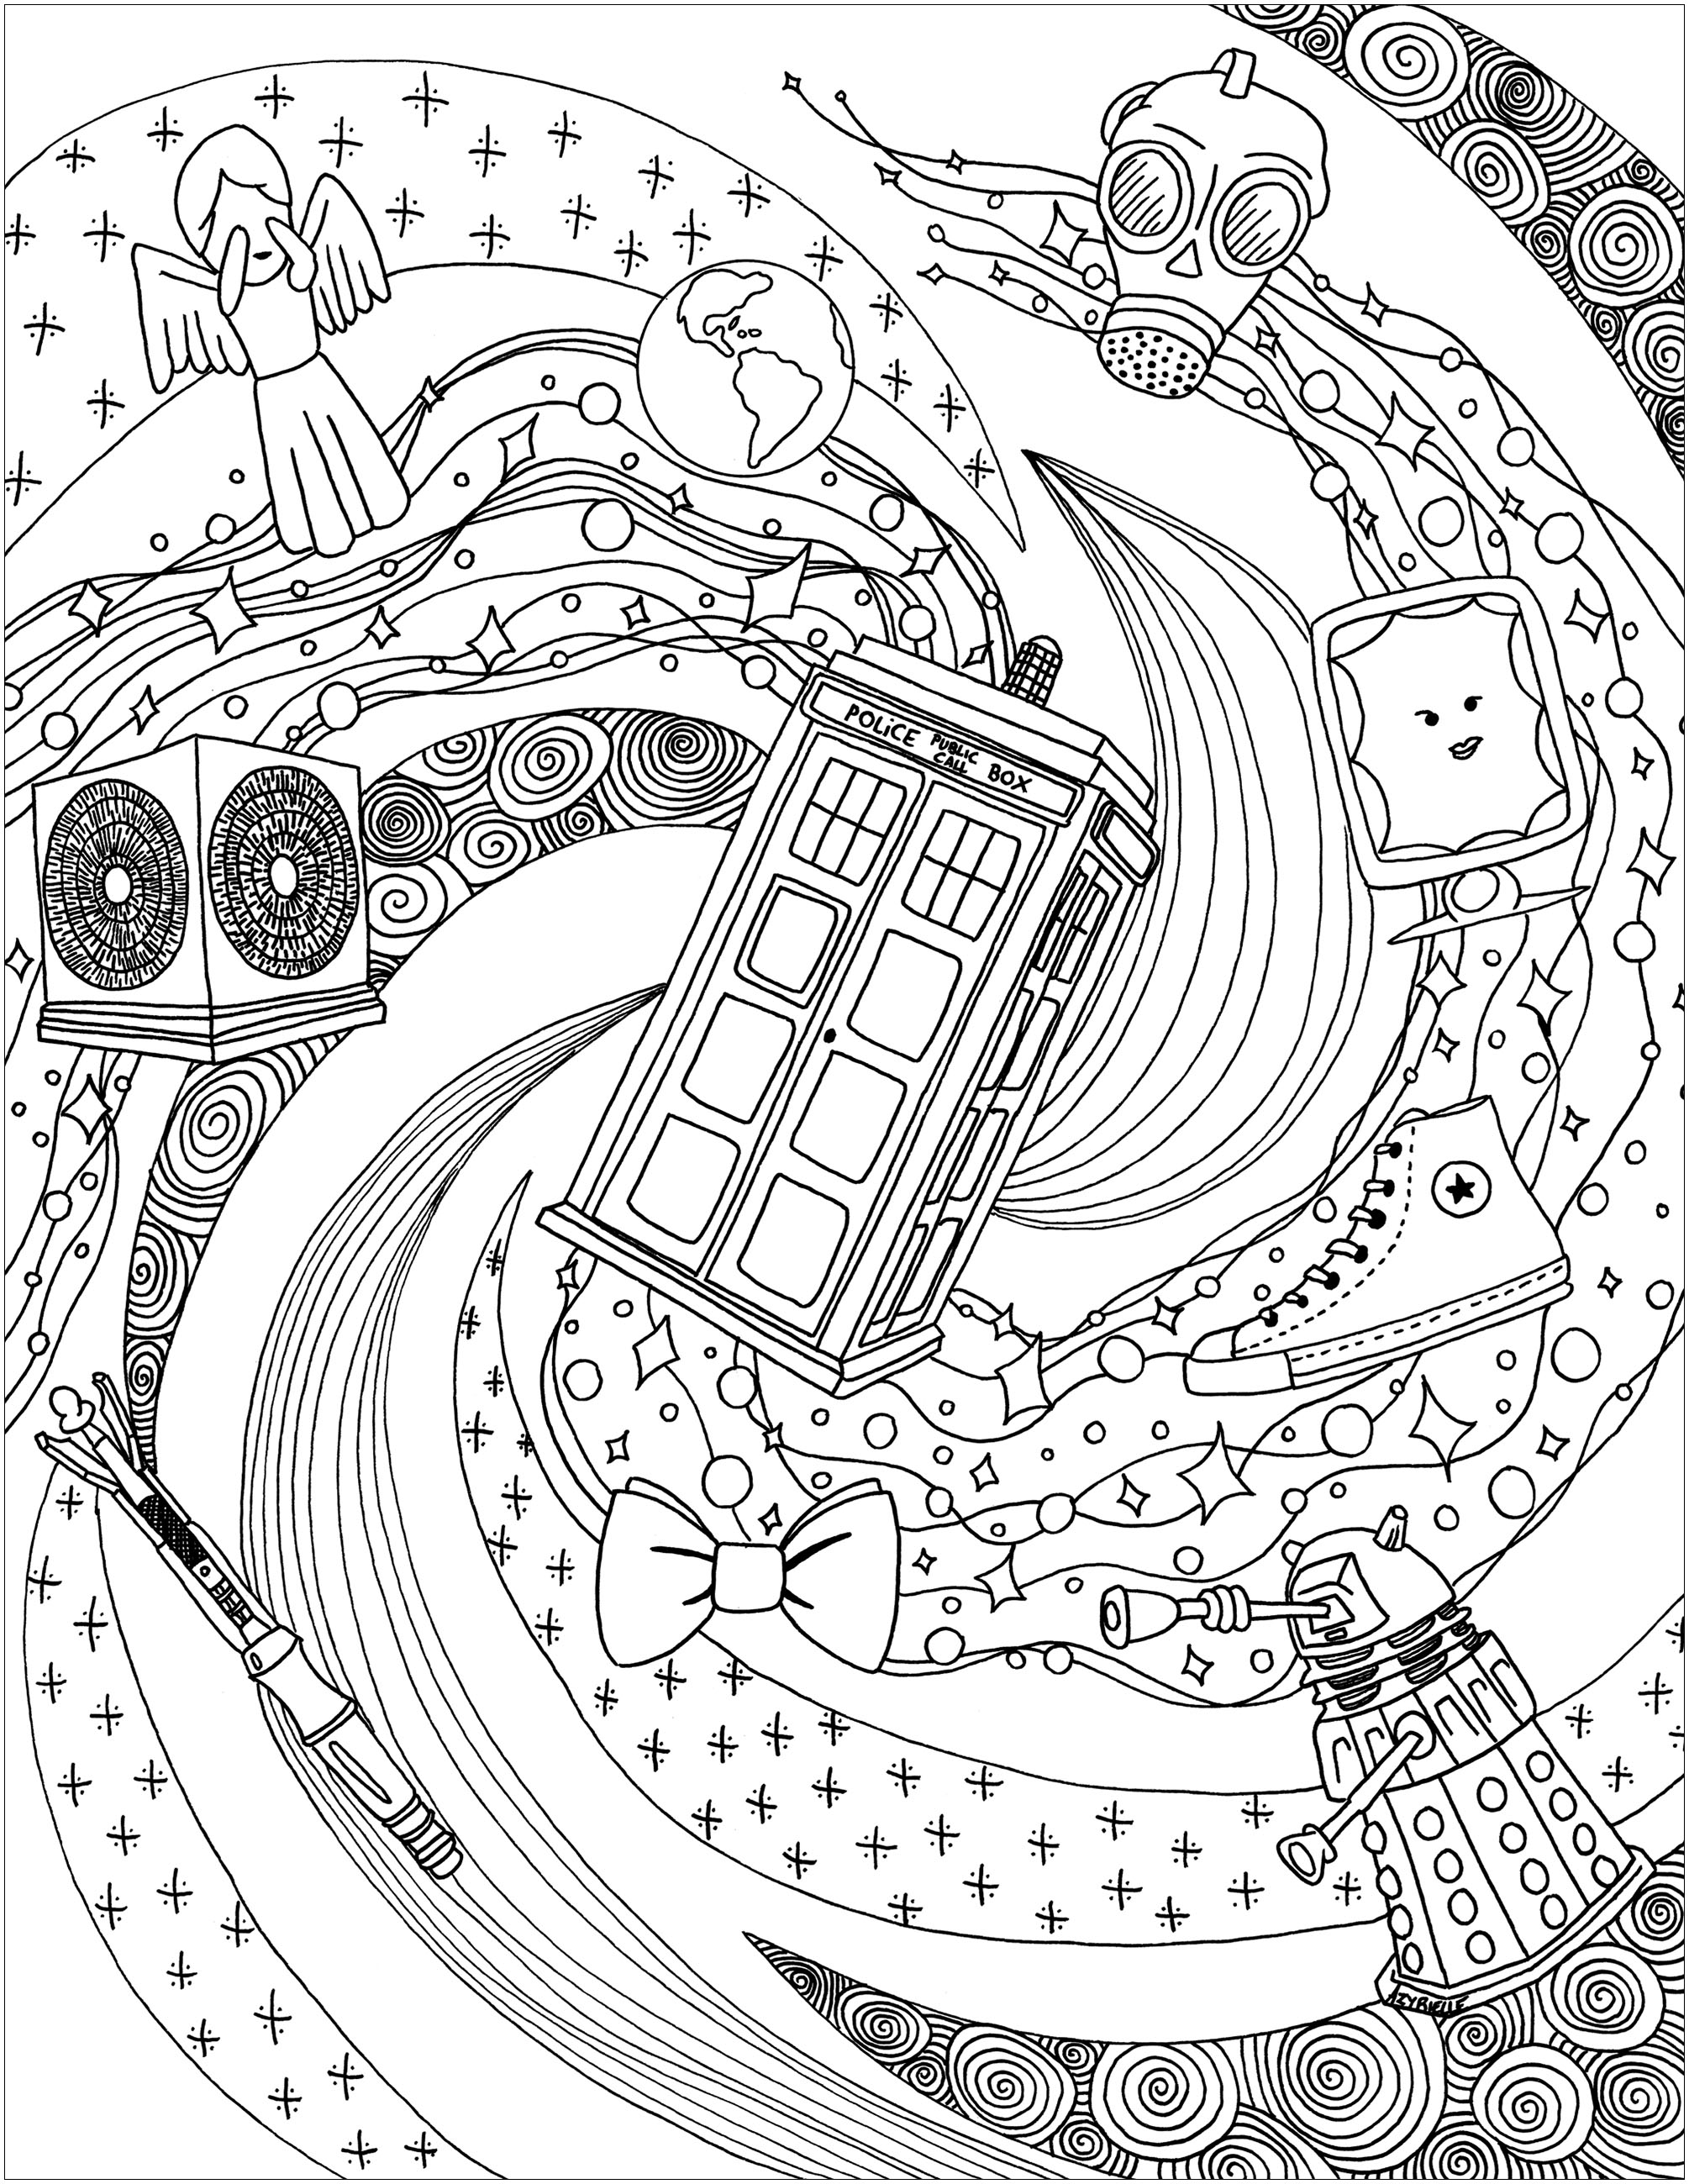 Doctor Who's world - TV shows Adult Coloring Pages